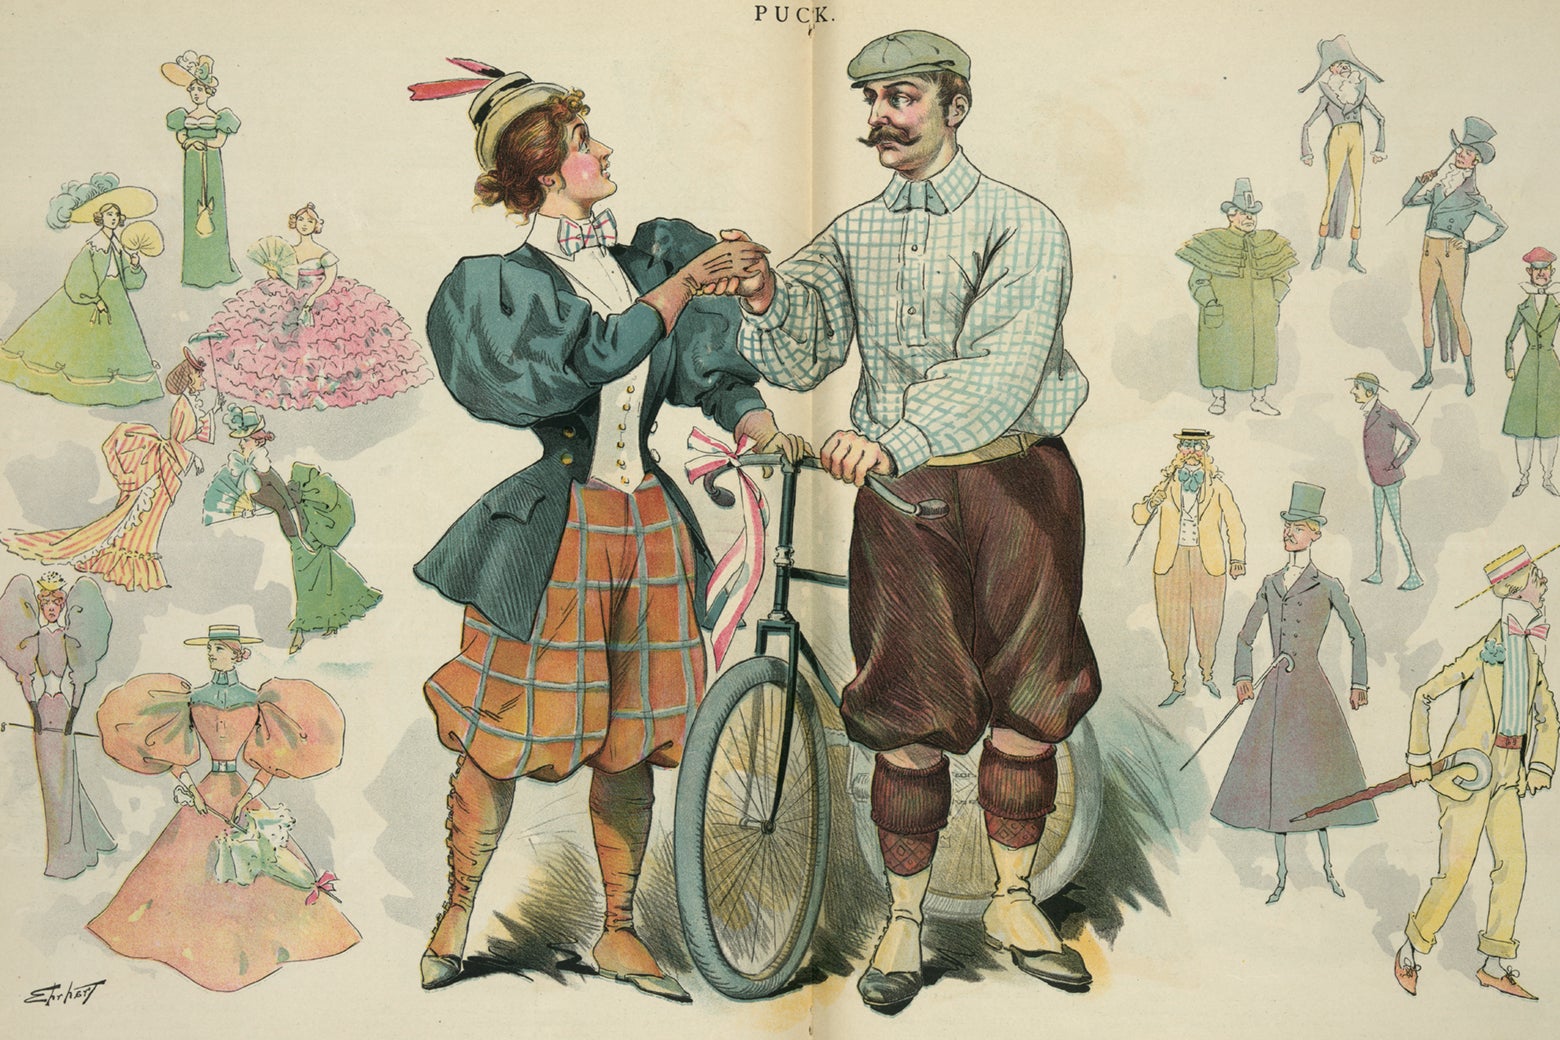 An illustration from Puck showing a man and woman in 1890s bicycling gear. The woman wears red bloomers.